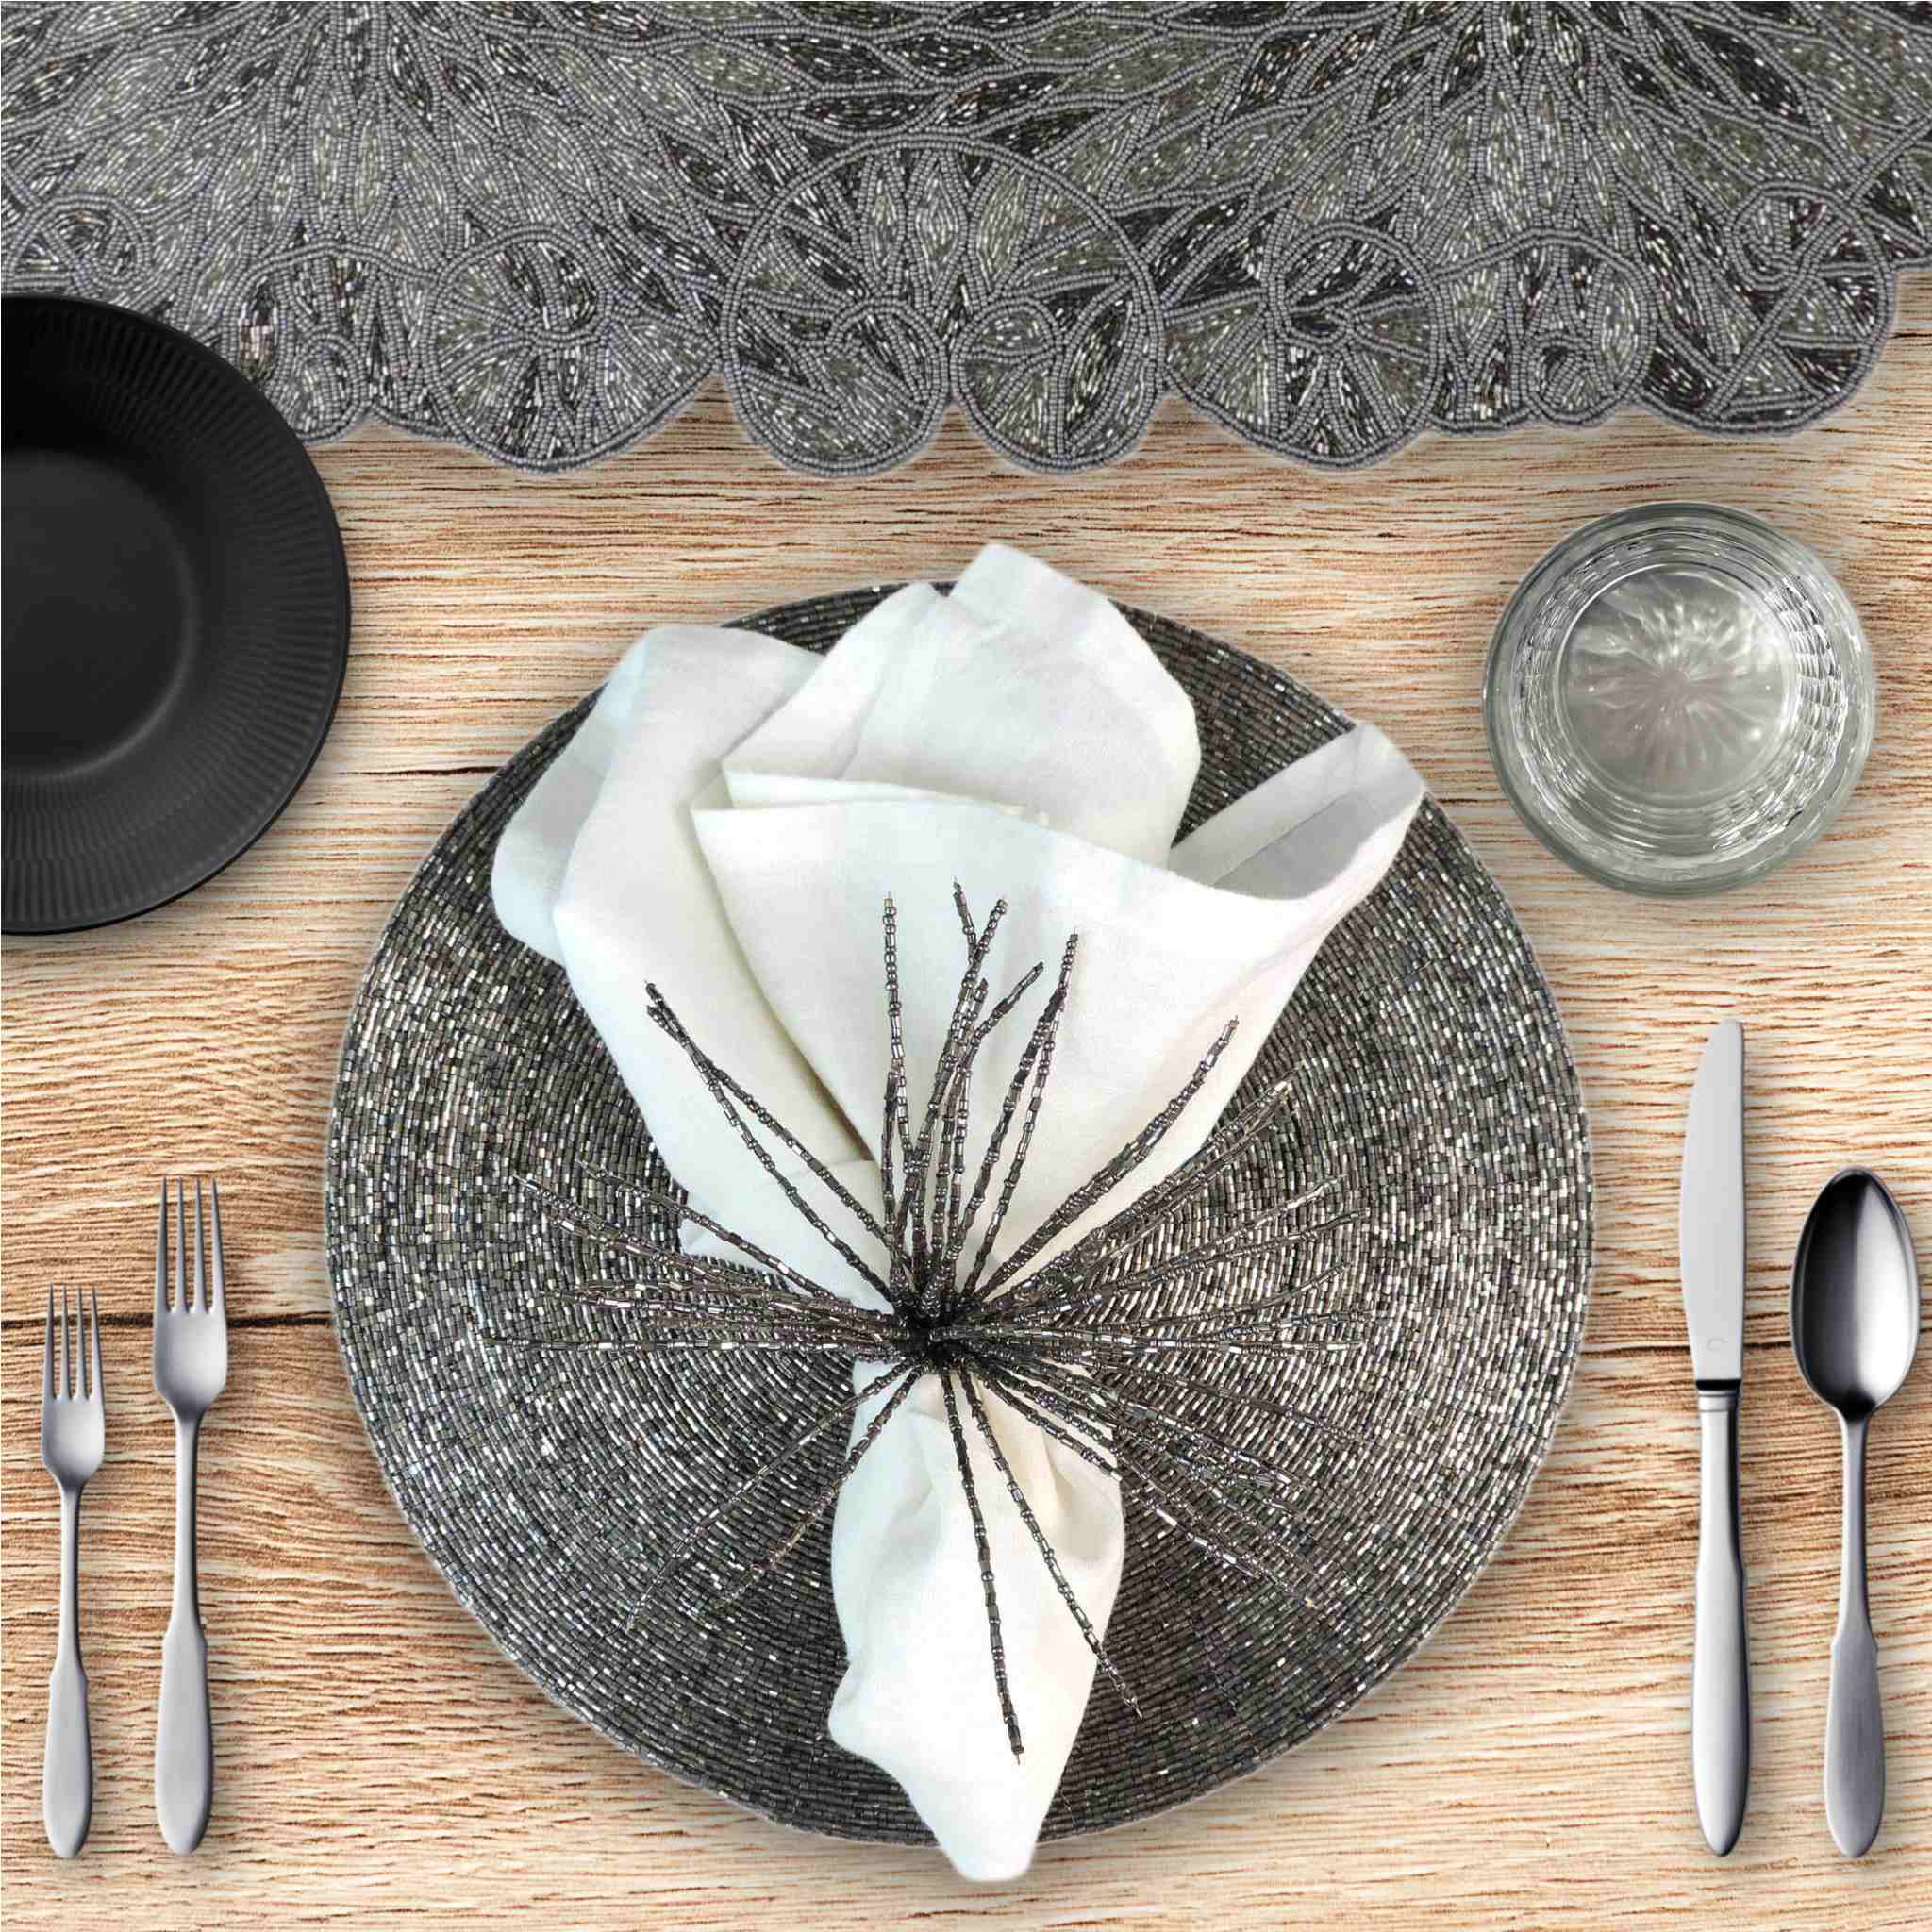 Glass Bead Table Setting for 4 - Placemats, Napkin Rings & Table Runner in Smoke